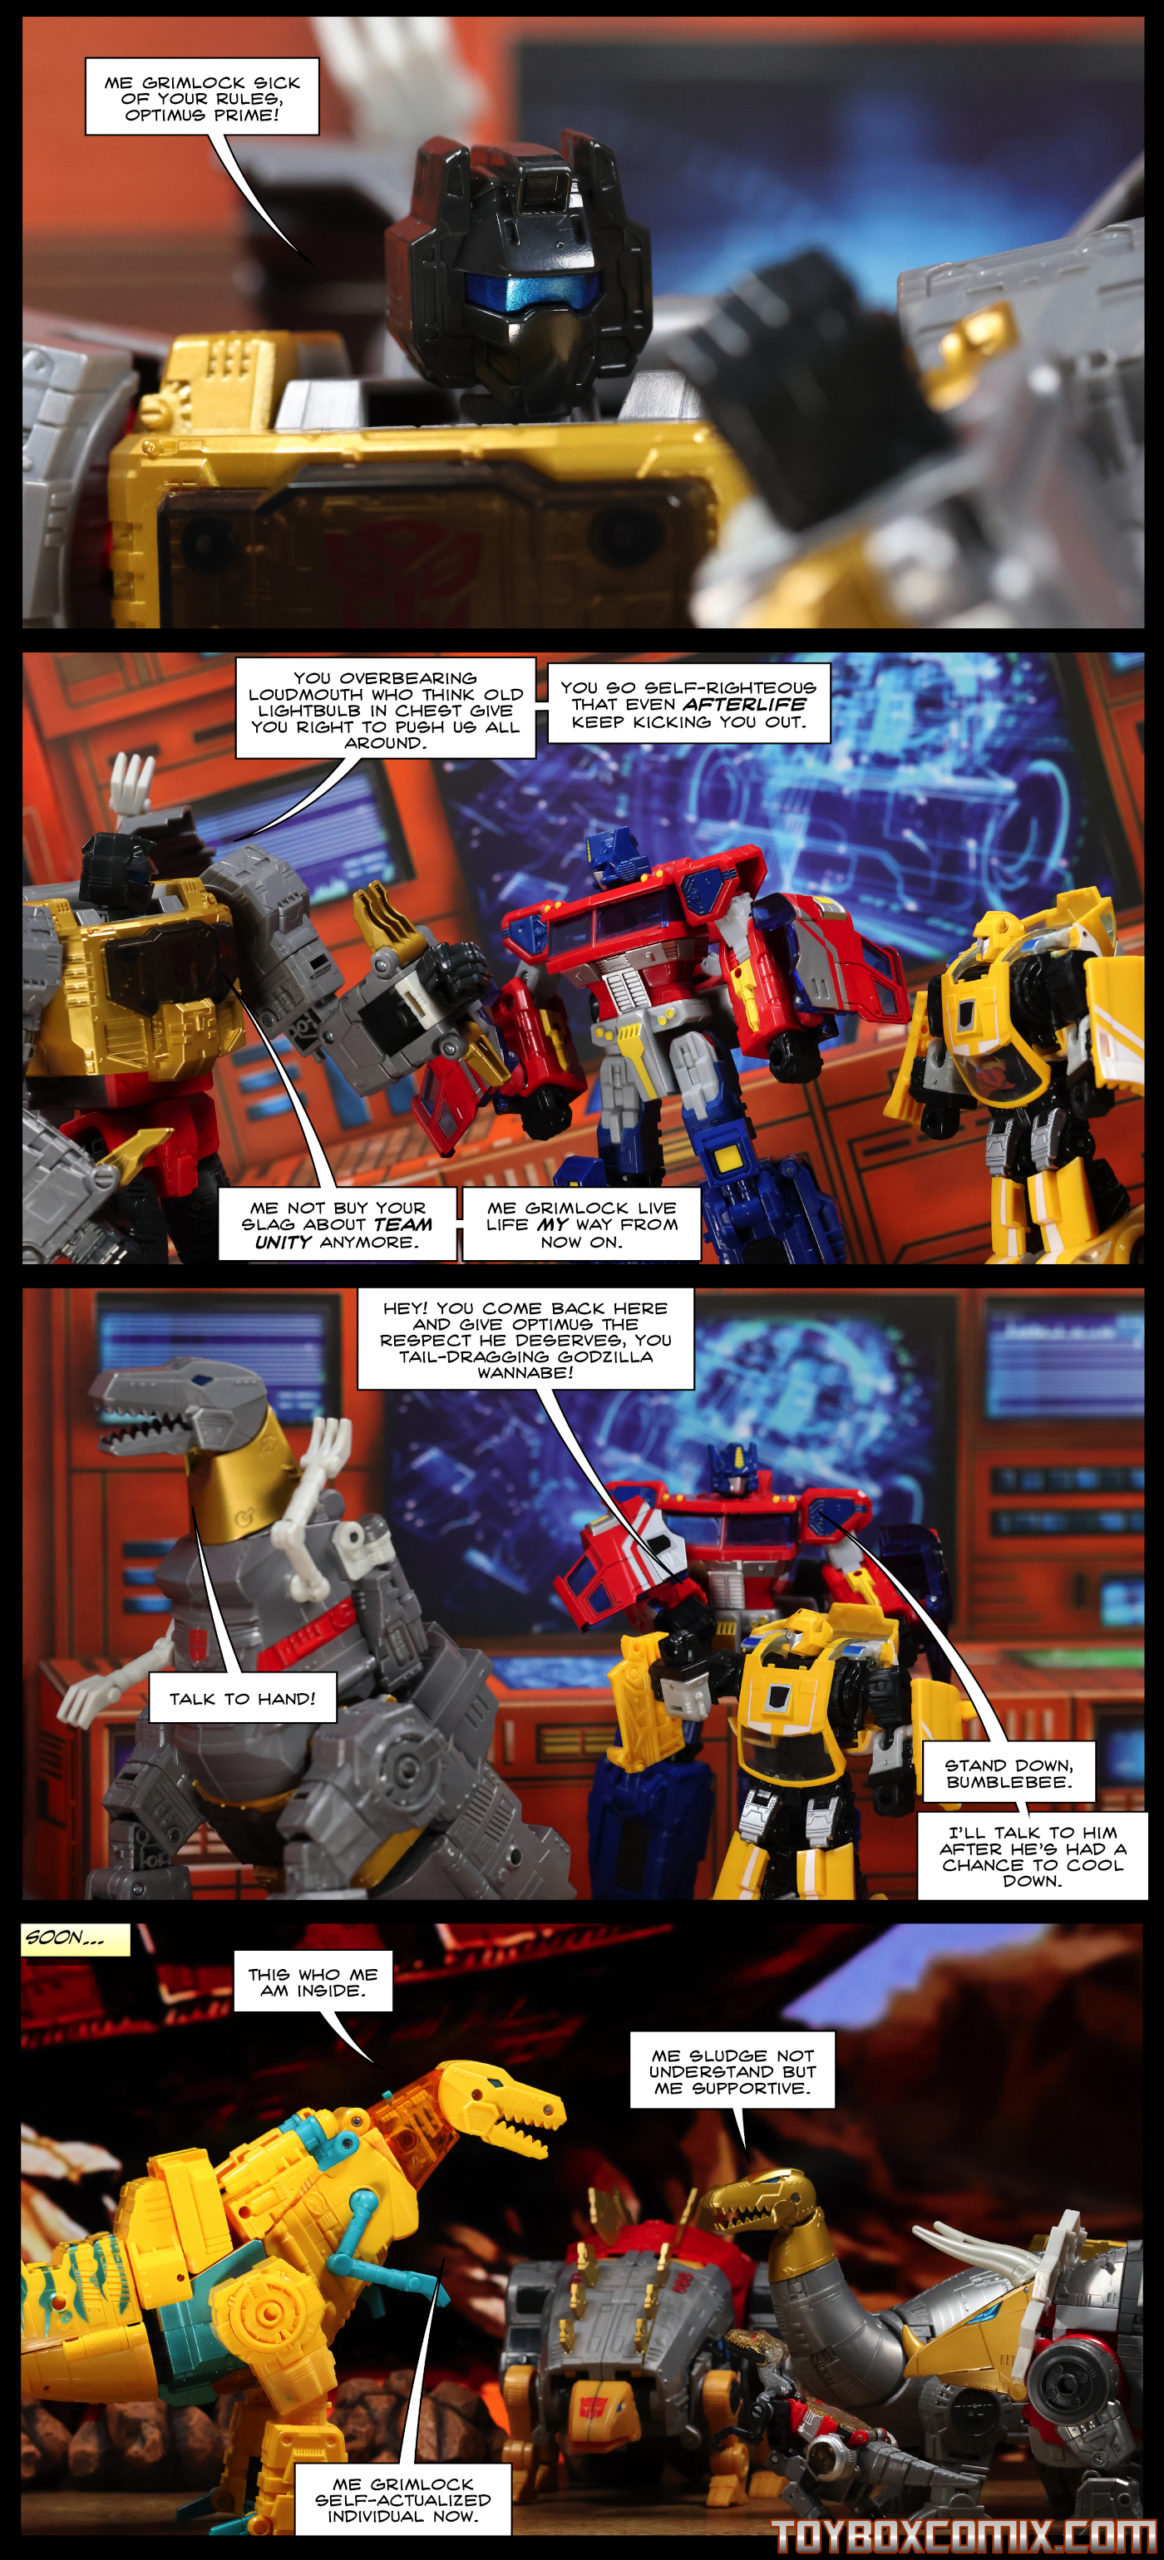 First panel: Grimlock (robot mode, traditional G1 colors): “Me Grimlock sick of your rules, Optimus Prime!” Second panel: Grimlock: “You overbearing loudmouth who think old lightbulb in chest give you right to push us all around. You so self-righteous that even afterlife keep kicking you out. Me not buy your slag about team unity anymore. Me Grimlock live life my way from now on.” Third panel: Bumblebee: “Hey! You come back here and give Optimus the respect he deserves, you tail-dragging Godzilla wannabe!” Grimlock (dino mode): “Talk to hand!” Optimus Prime: “Stand down, Bumblebee. I’ll talk to him after he’s had a chance to cool down.” Fourth panel: Caption: “Soon…” Grimlock, (dino mode, Toxitron Collection G2 colors) to Slug, Snarl, Sludge, and Slash all in G1-colors dino mode: “This who me am inside.” Sludge: “Me Sludge not understand but me supportive.” Grimlock: “Me Grimlock self-actualized individual now.”